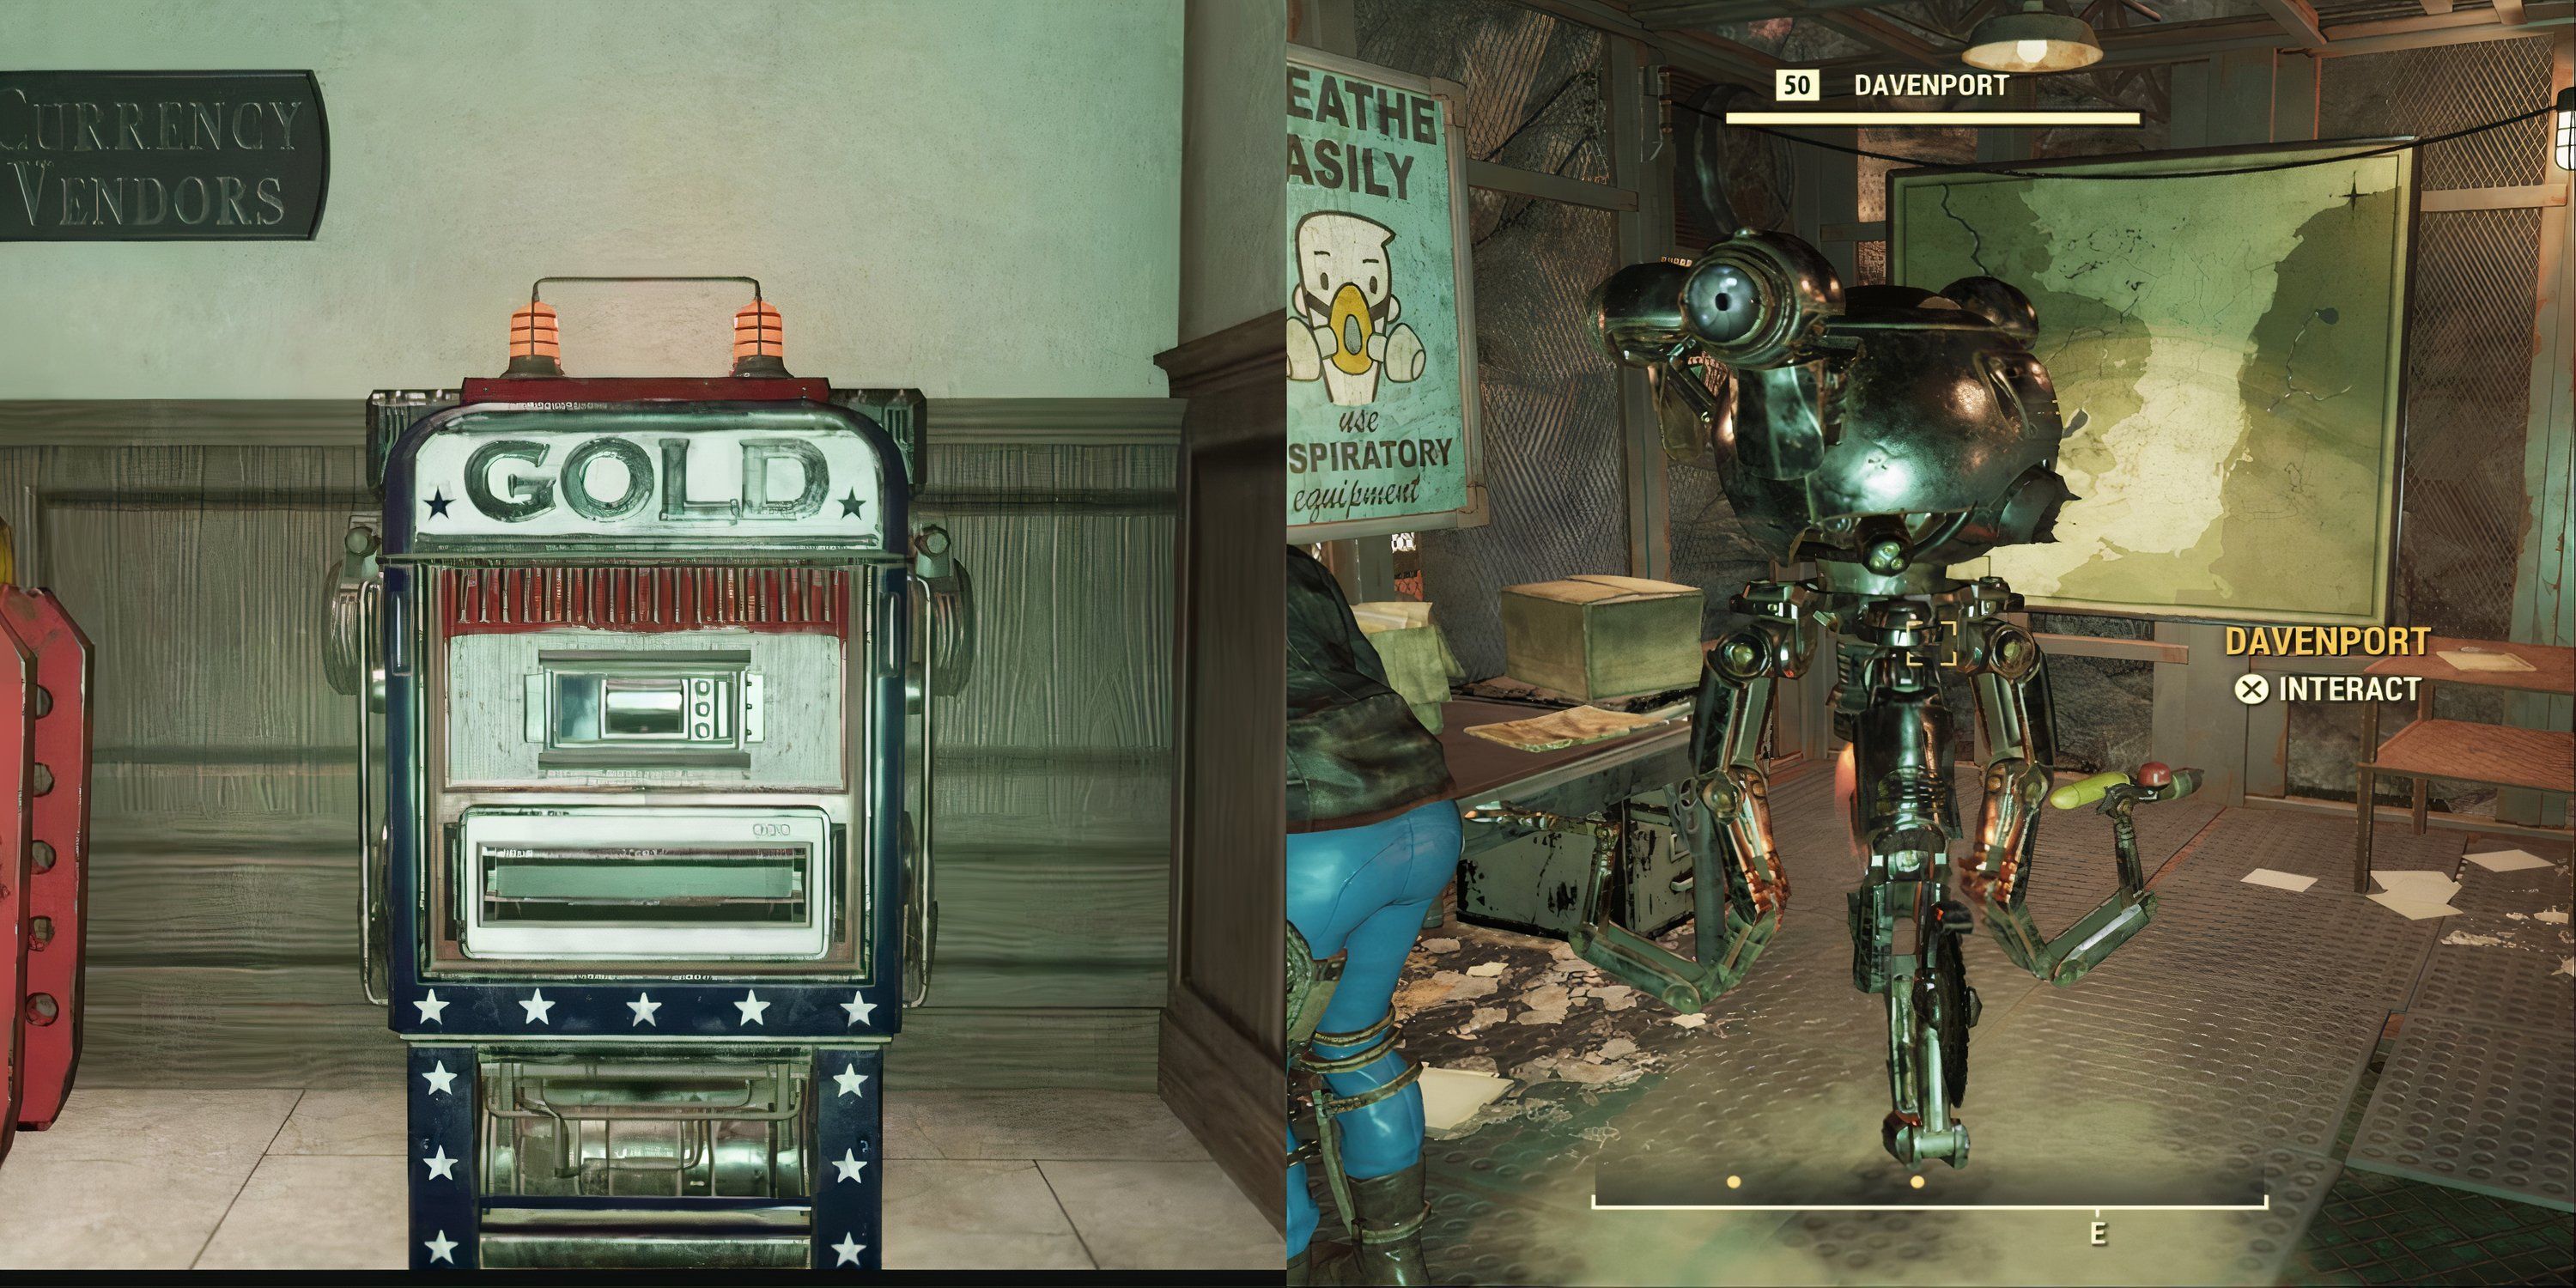 Gold Bullion Machine and Davenport in Fallout 76